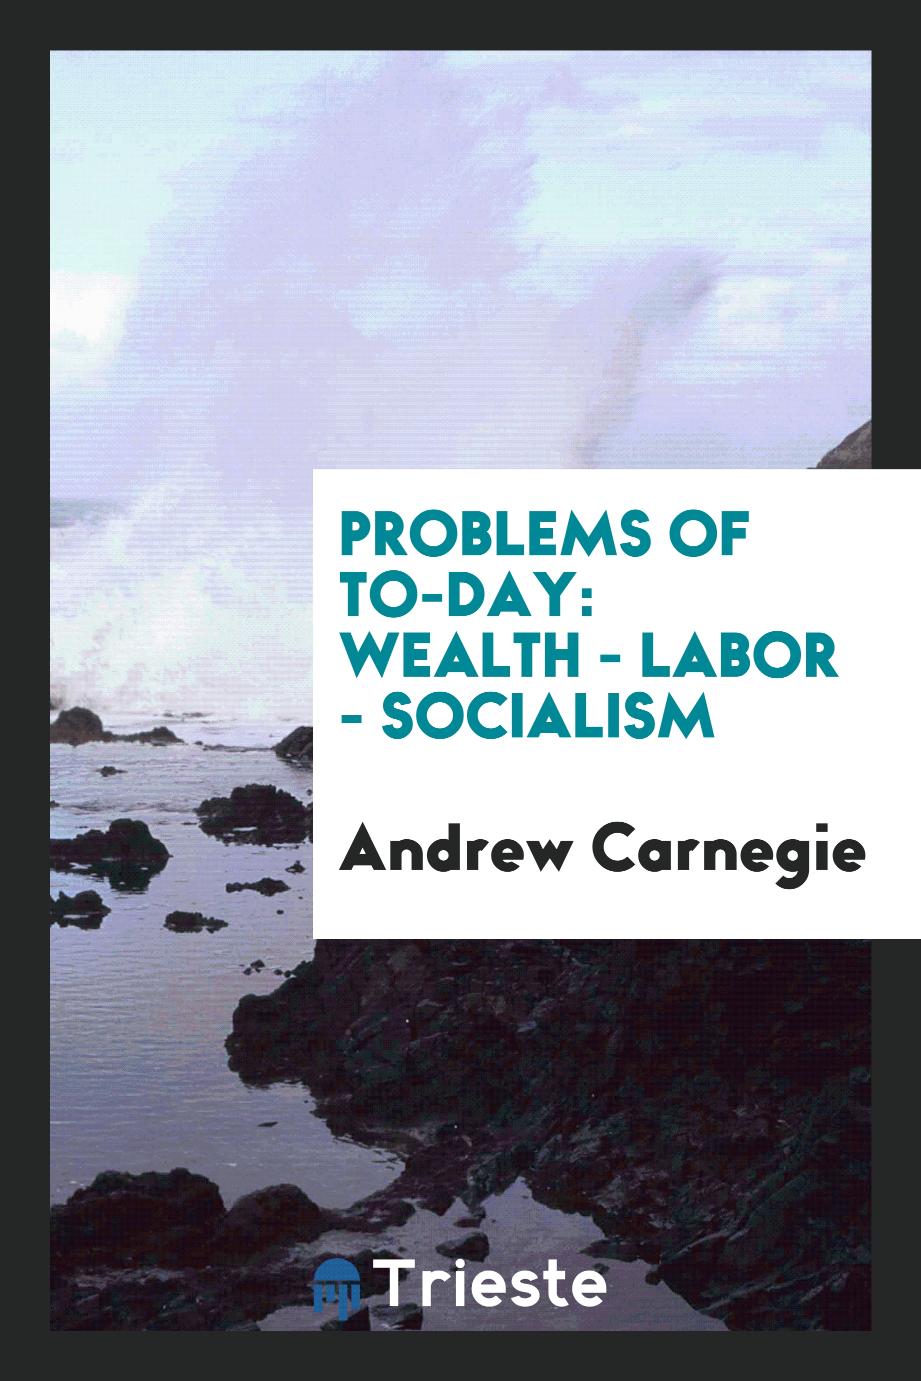 Problems of To-Day: Wealth - Labor - Socialism